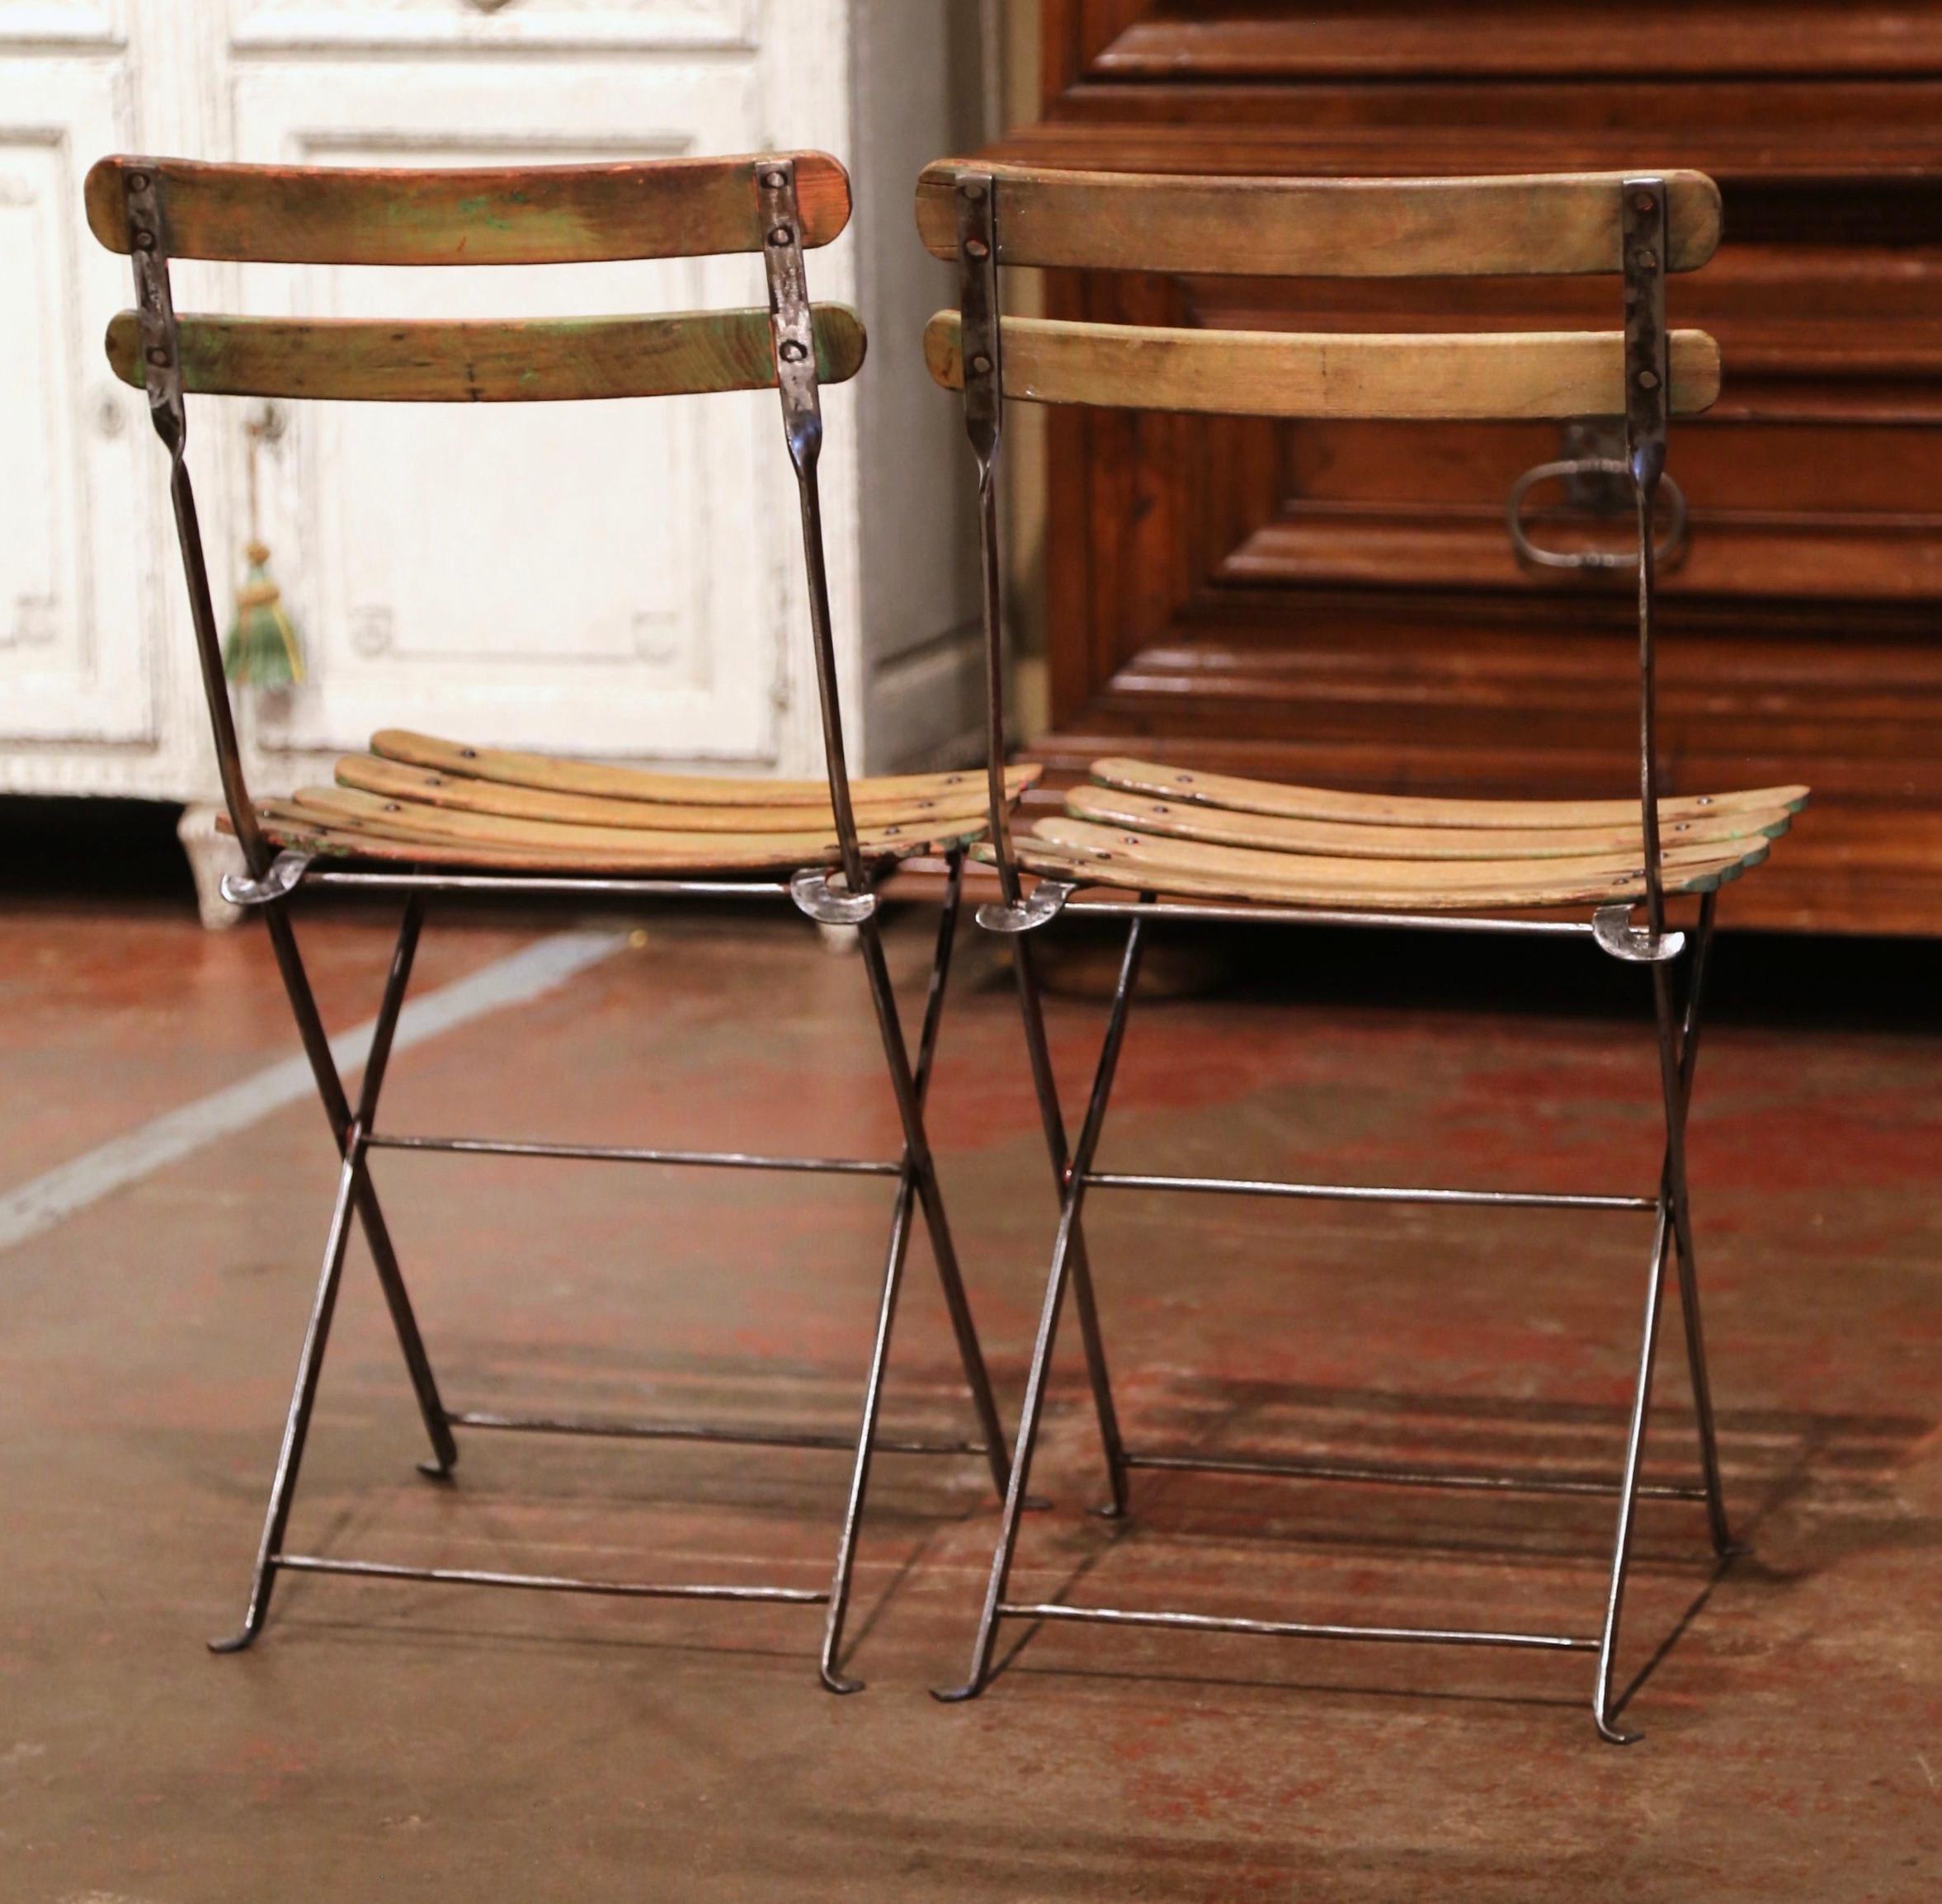 Pair of Early 20th Century French Polished Iron and Wood Folding Garden Chairs 5